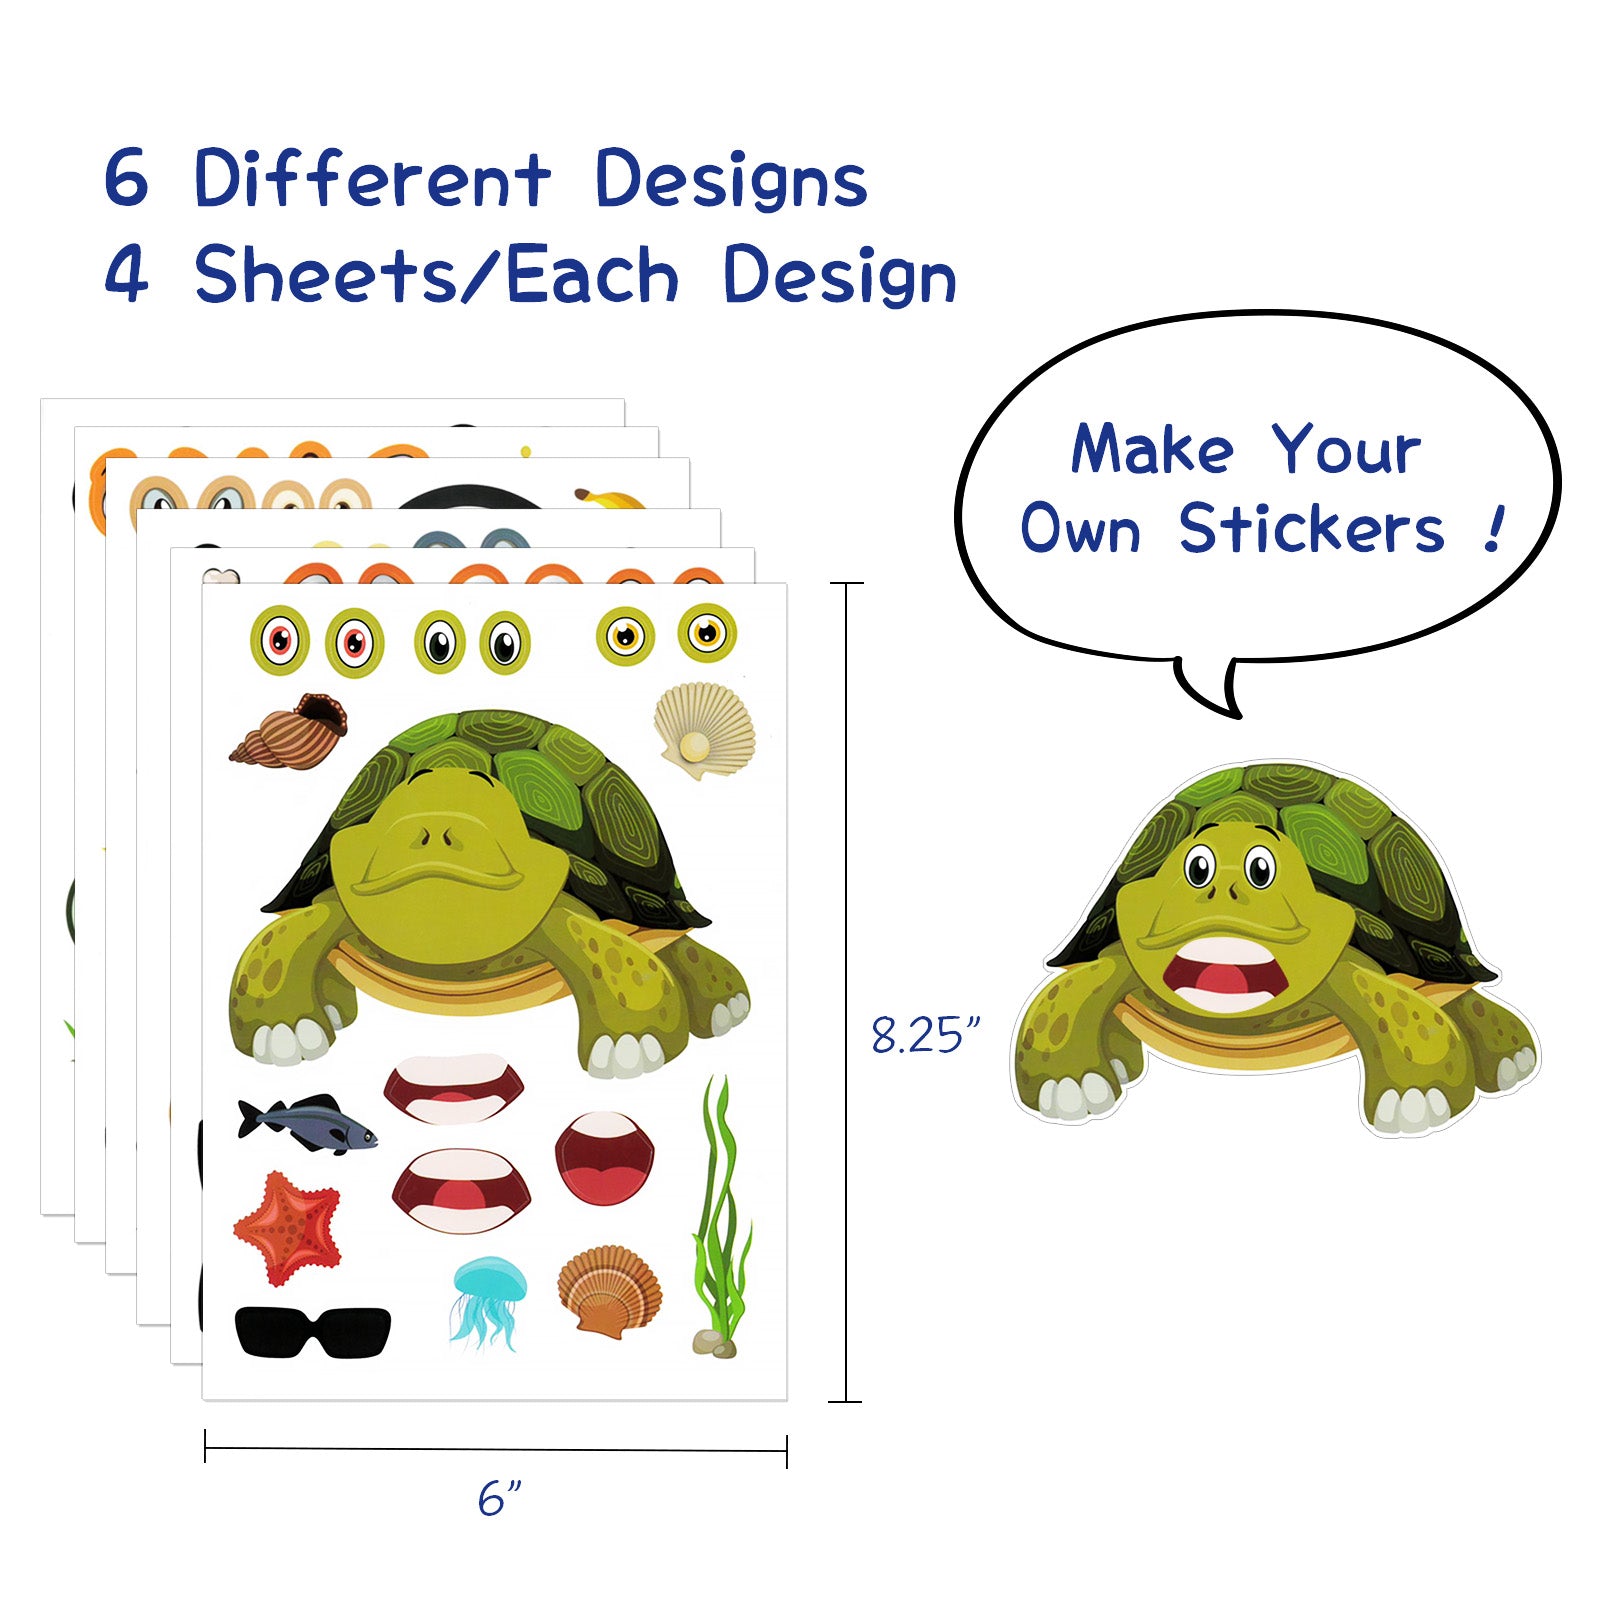 Make Your Own Stickers out of Any Paper Design